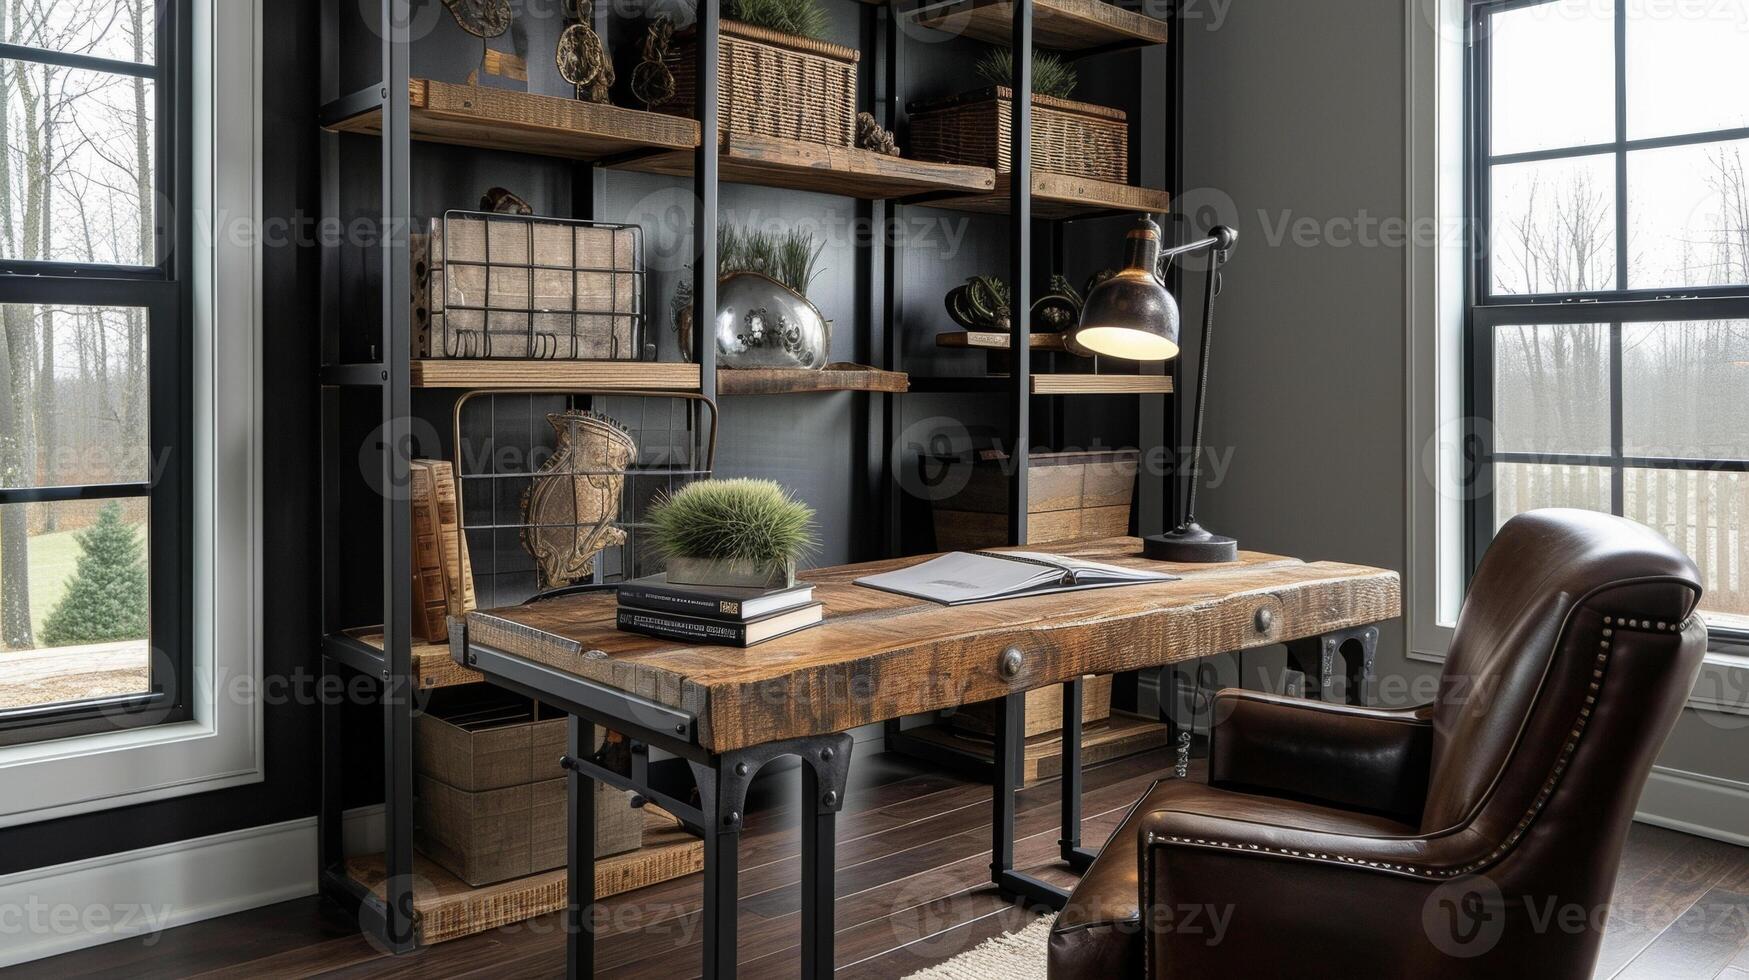 Create a rustic and inviting home office with a reclaimed wood desk industrial shelves for storage and a comfortable leather chair. Perfect for those who want to feel inspire photo